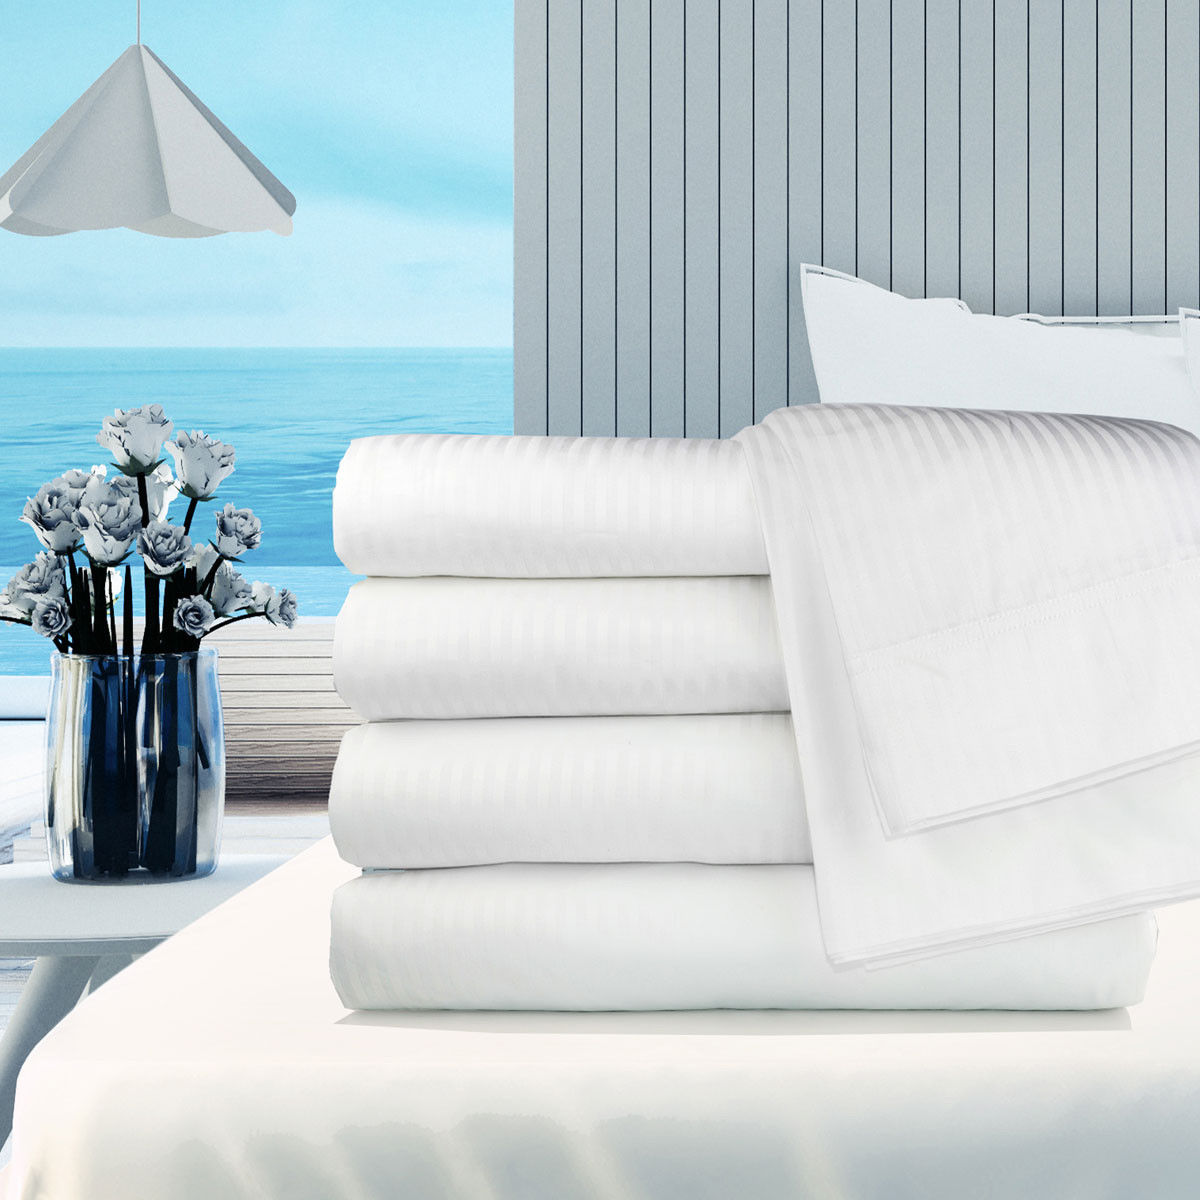 What are the key features of the Oxford Super Blend Tone on Tone Hotel Sheets?